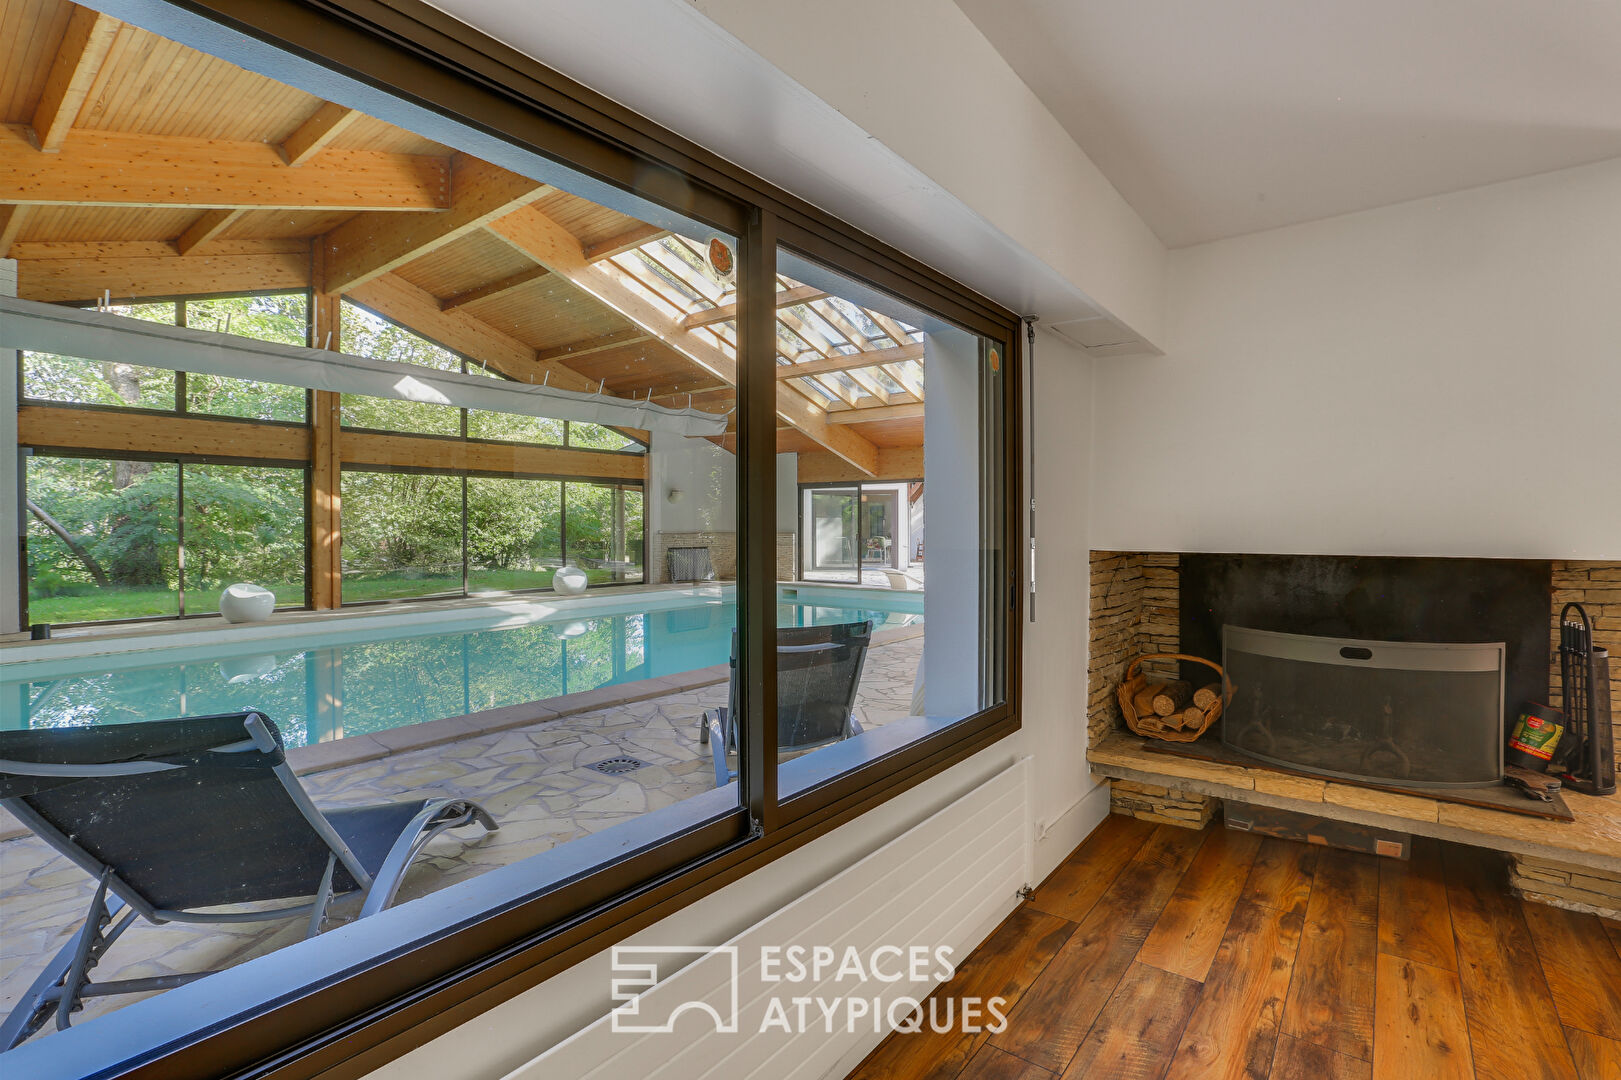 Seventies-style property and its indoor swimming pool